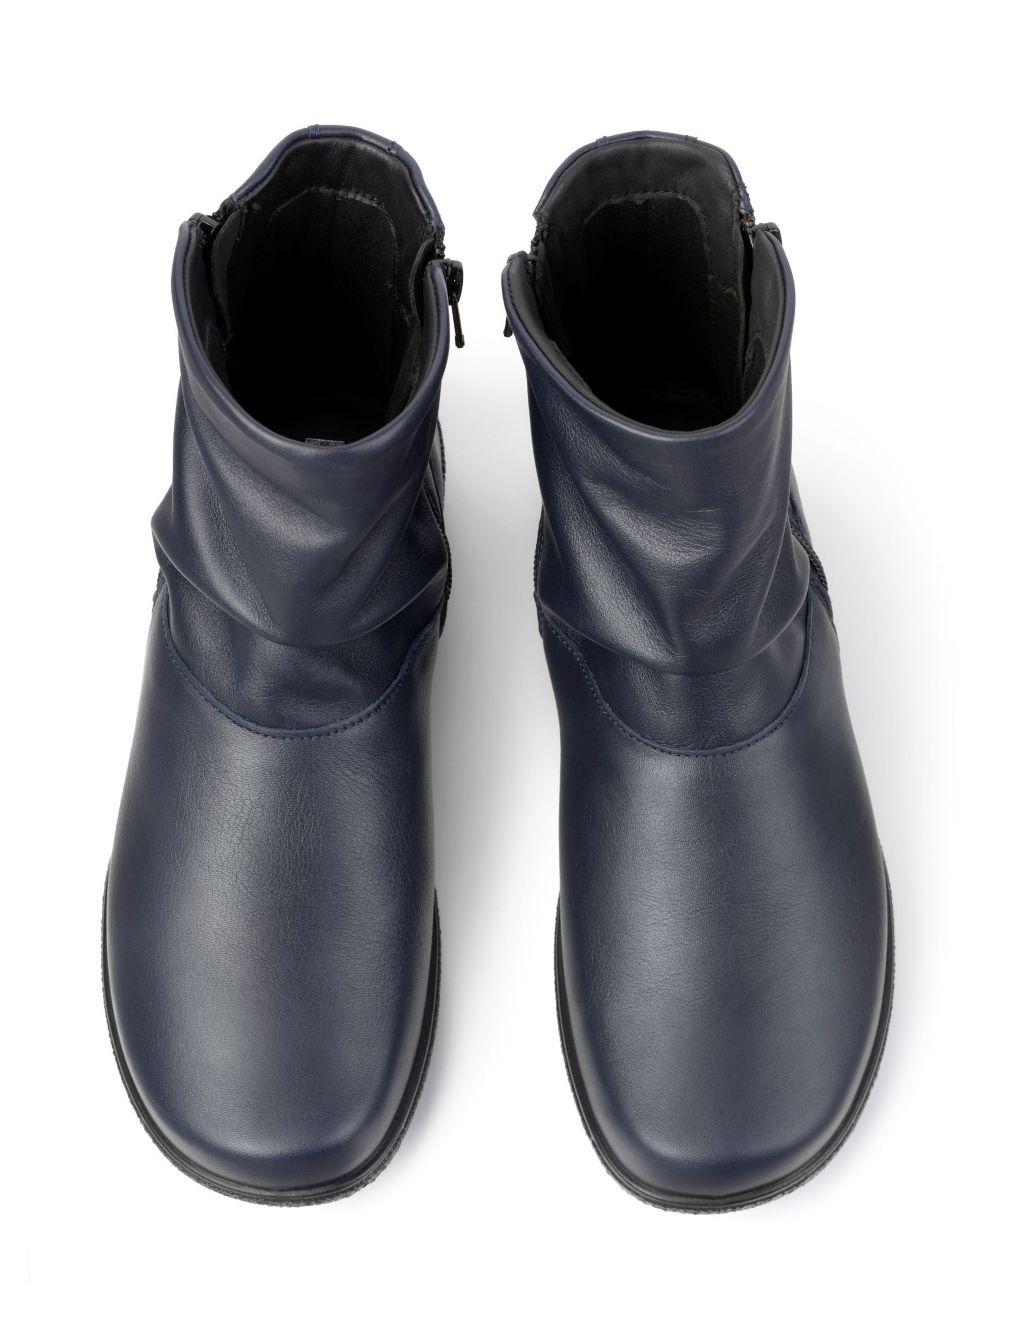 Whisper Extra Wide Fit Leather Ankle Boots image 3